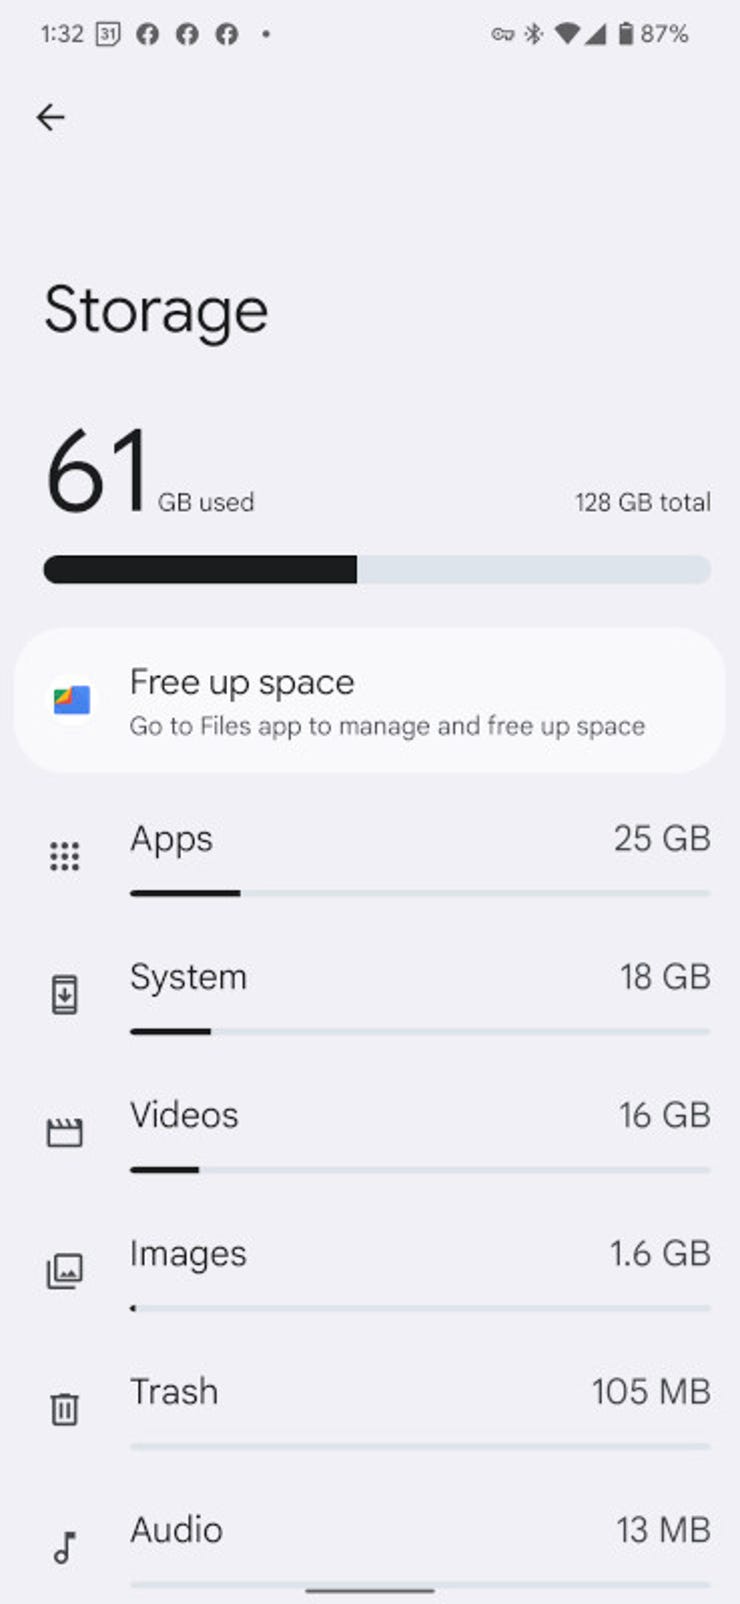 Save space on your Android phone with web apps